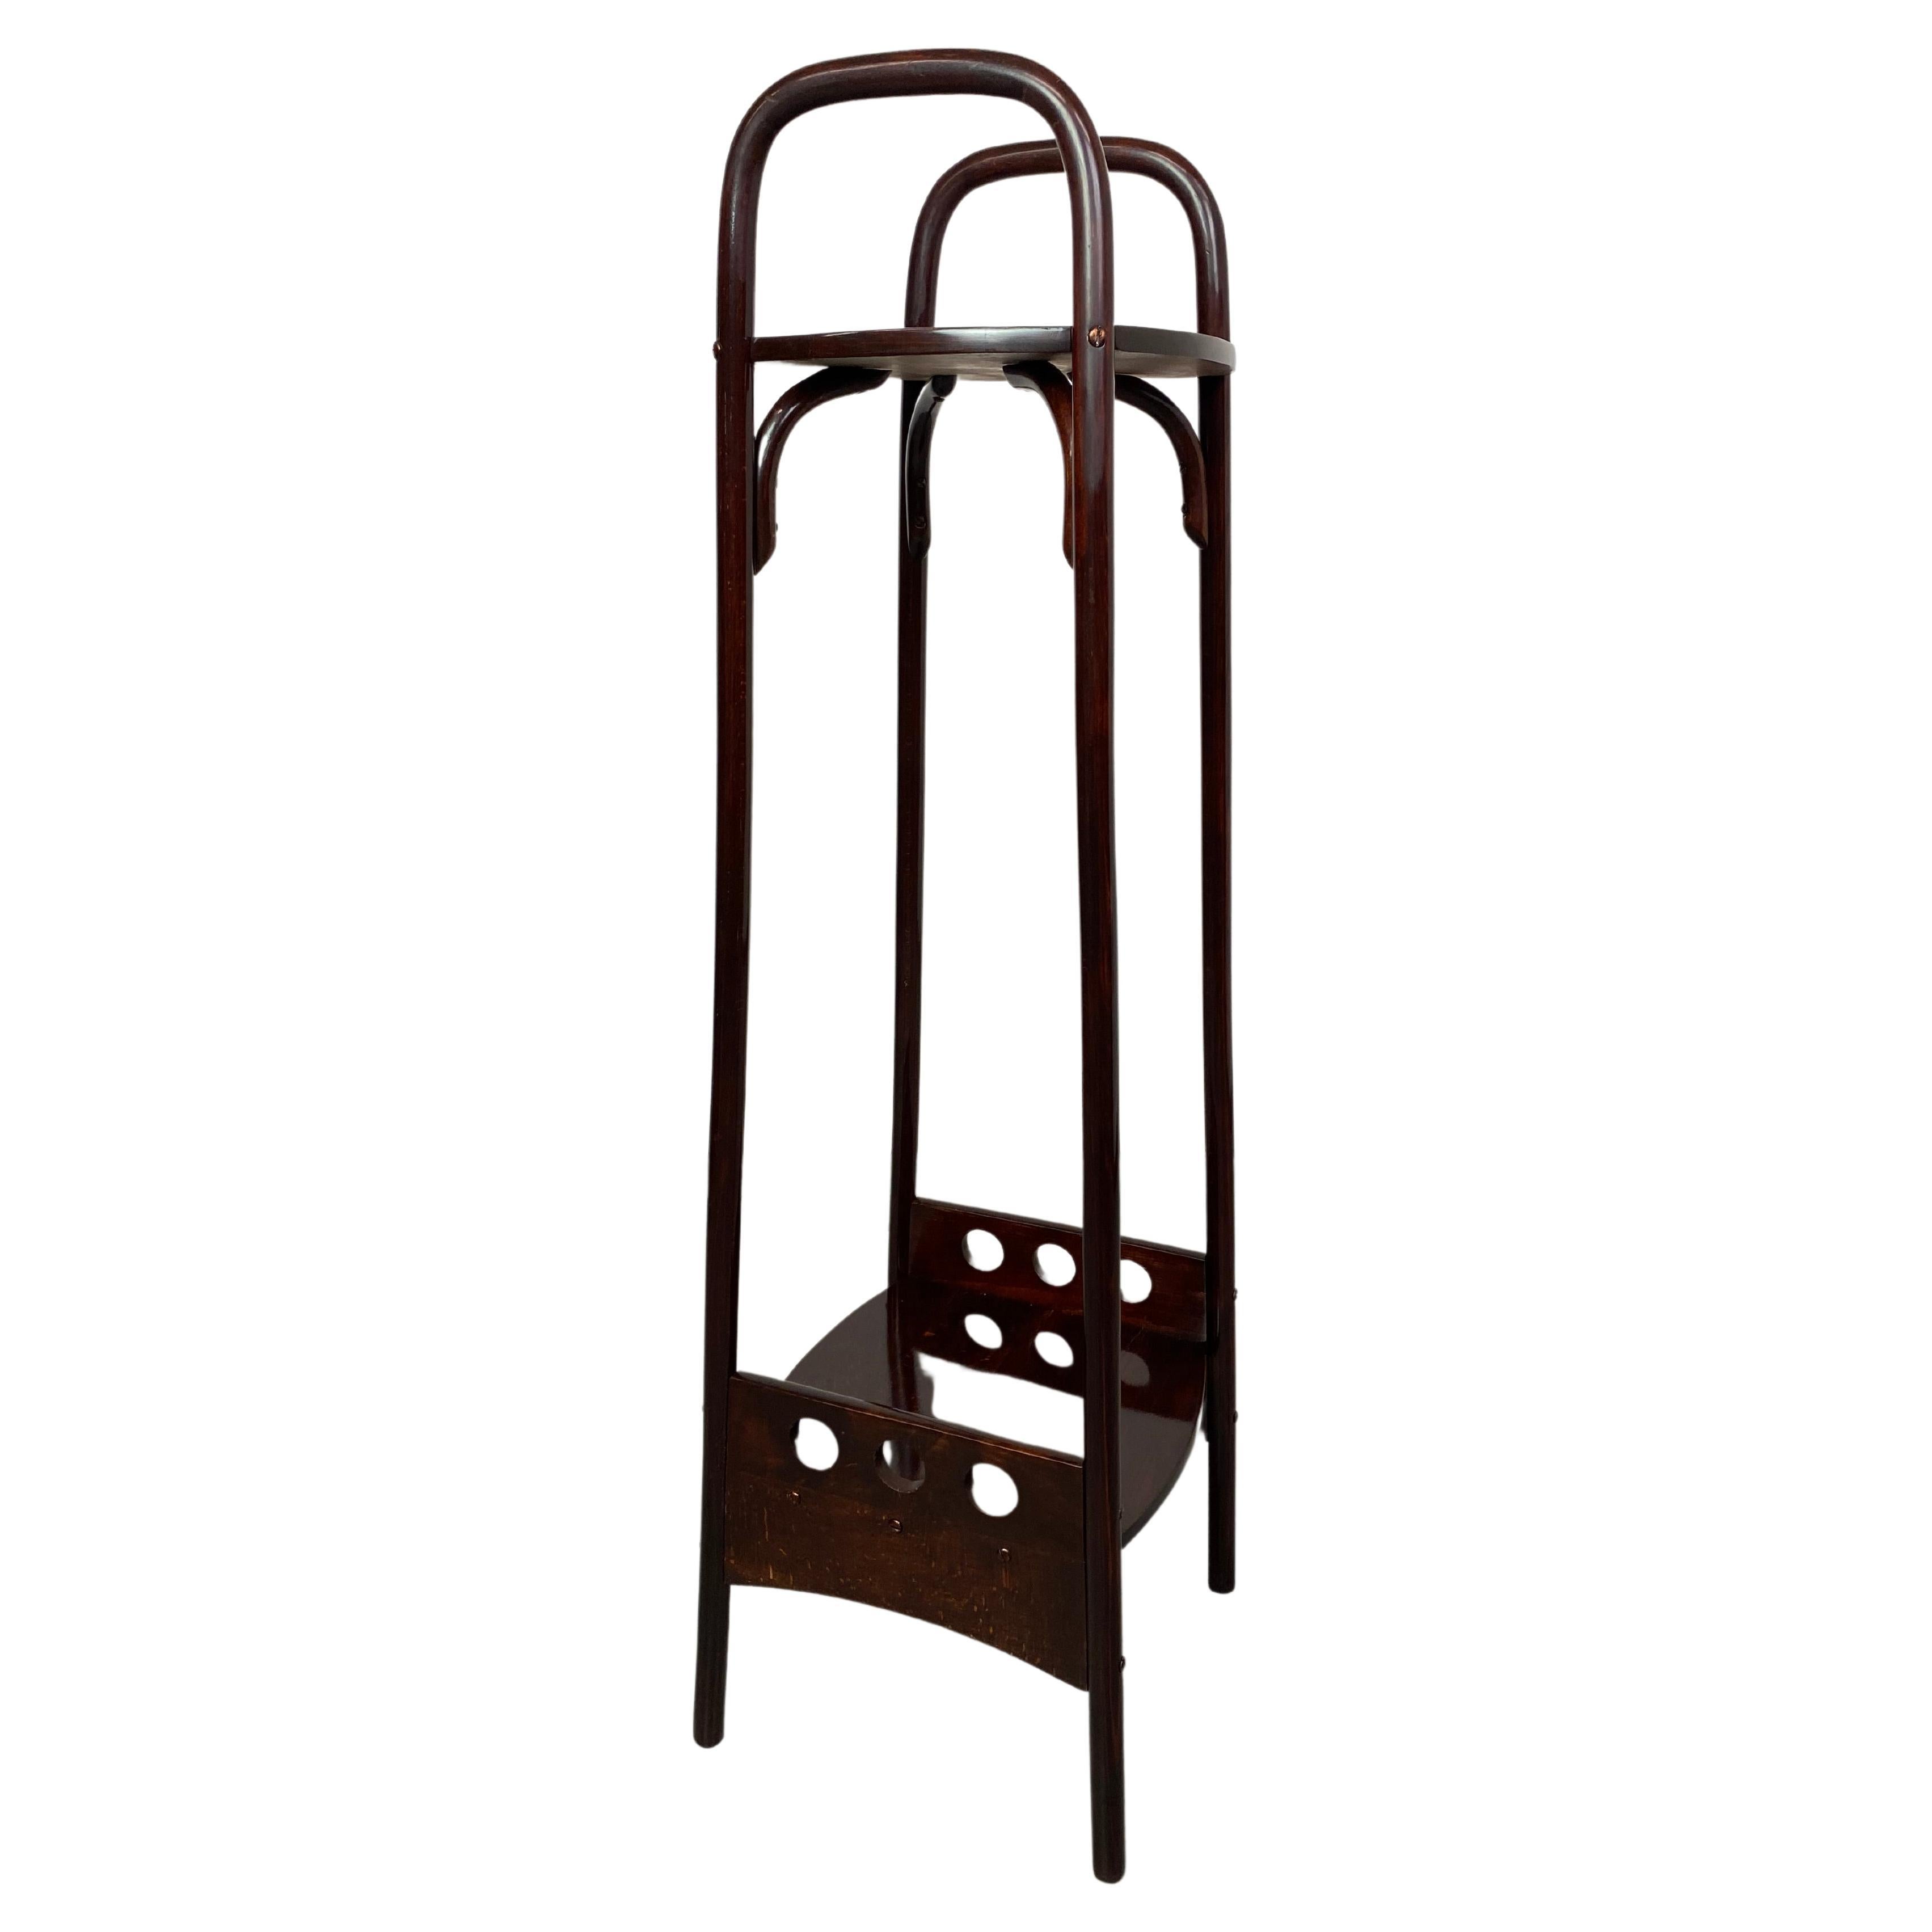 Secession plant stand by Josef Hoffmann for Thonet